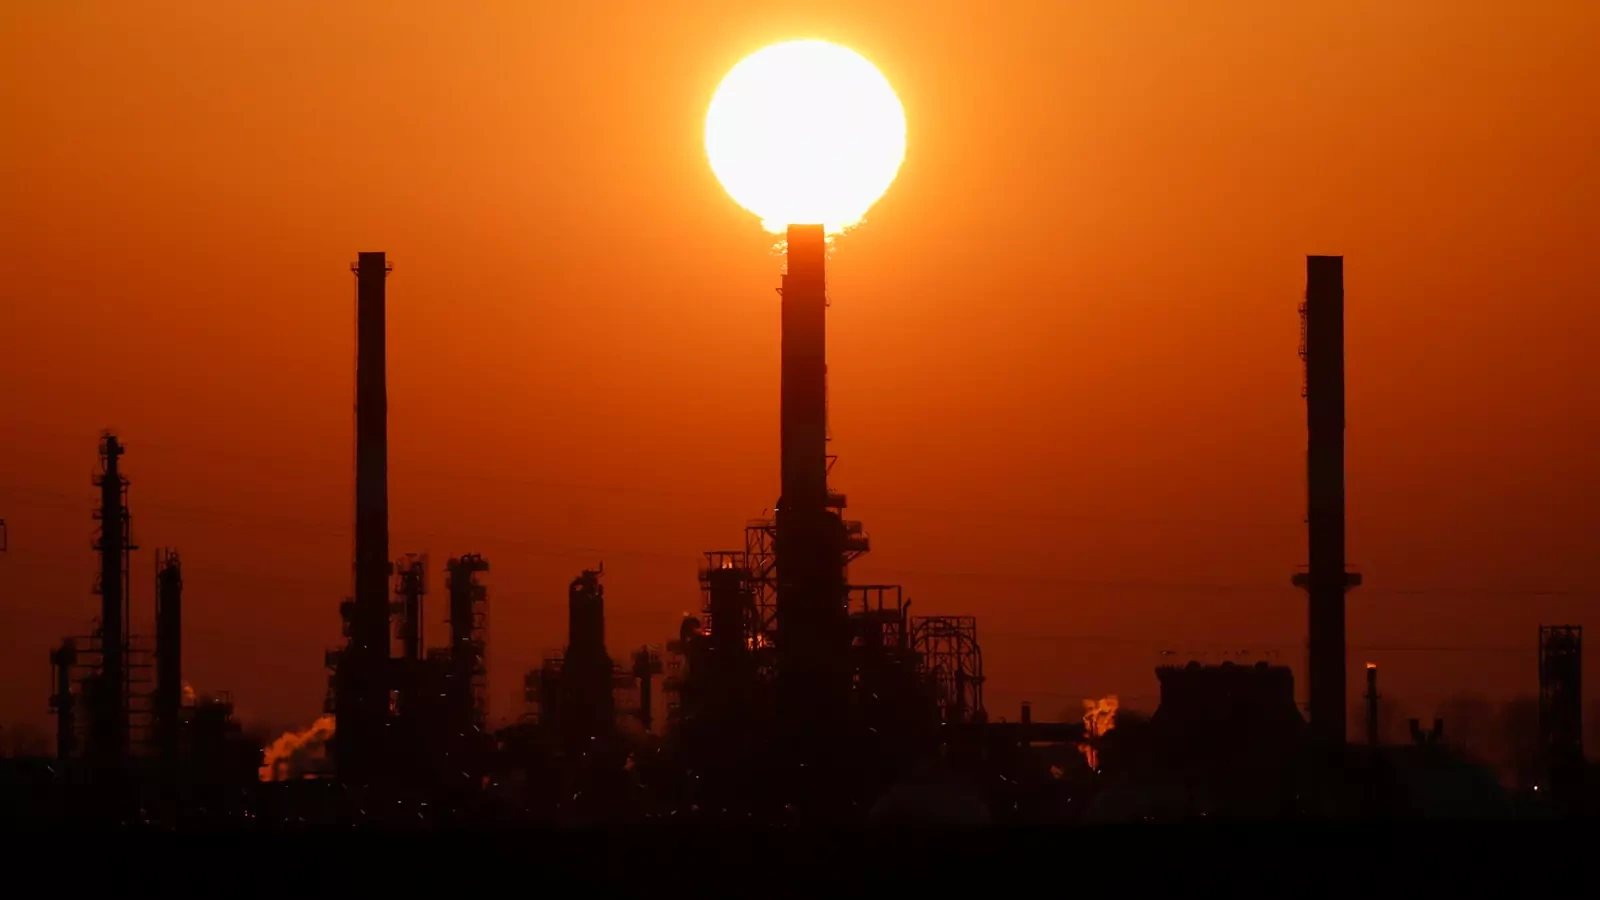 The sun sets behind the chimneys of the Total Grandpuits oil refinery, southeast of Paris, France, March 1, 2021.